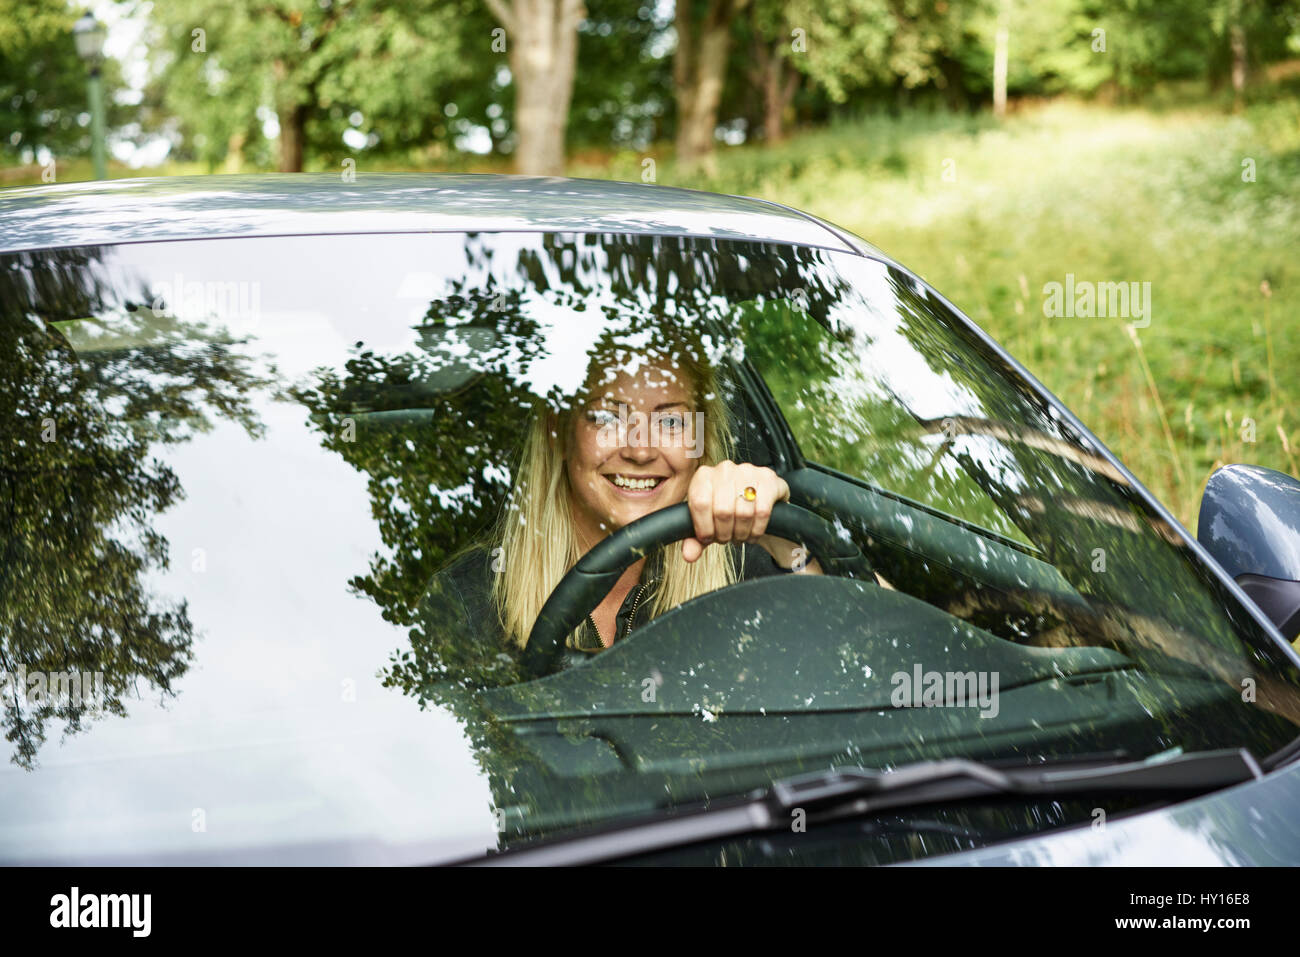 Sweden, Uppland, Smiling woman travelling by car in countryside Stock Photo